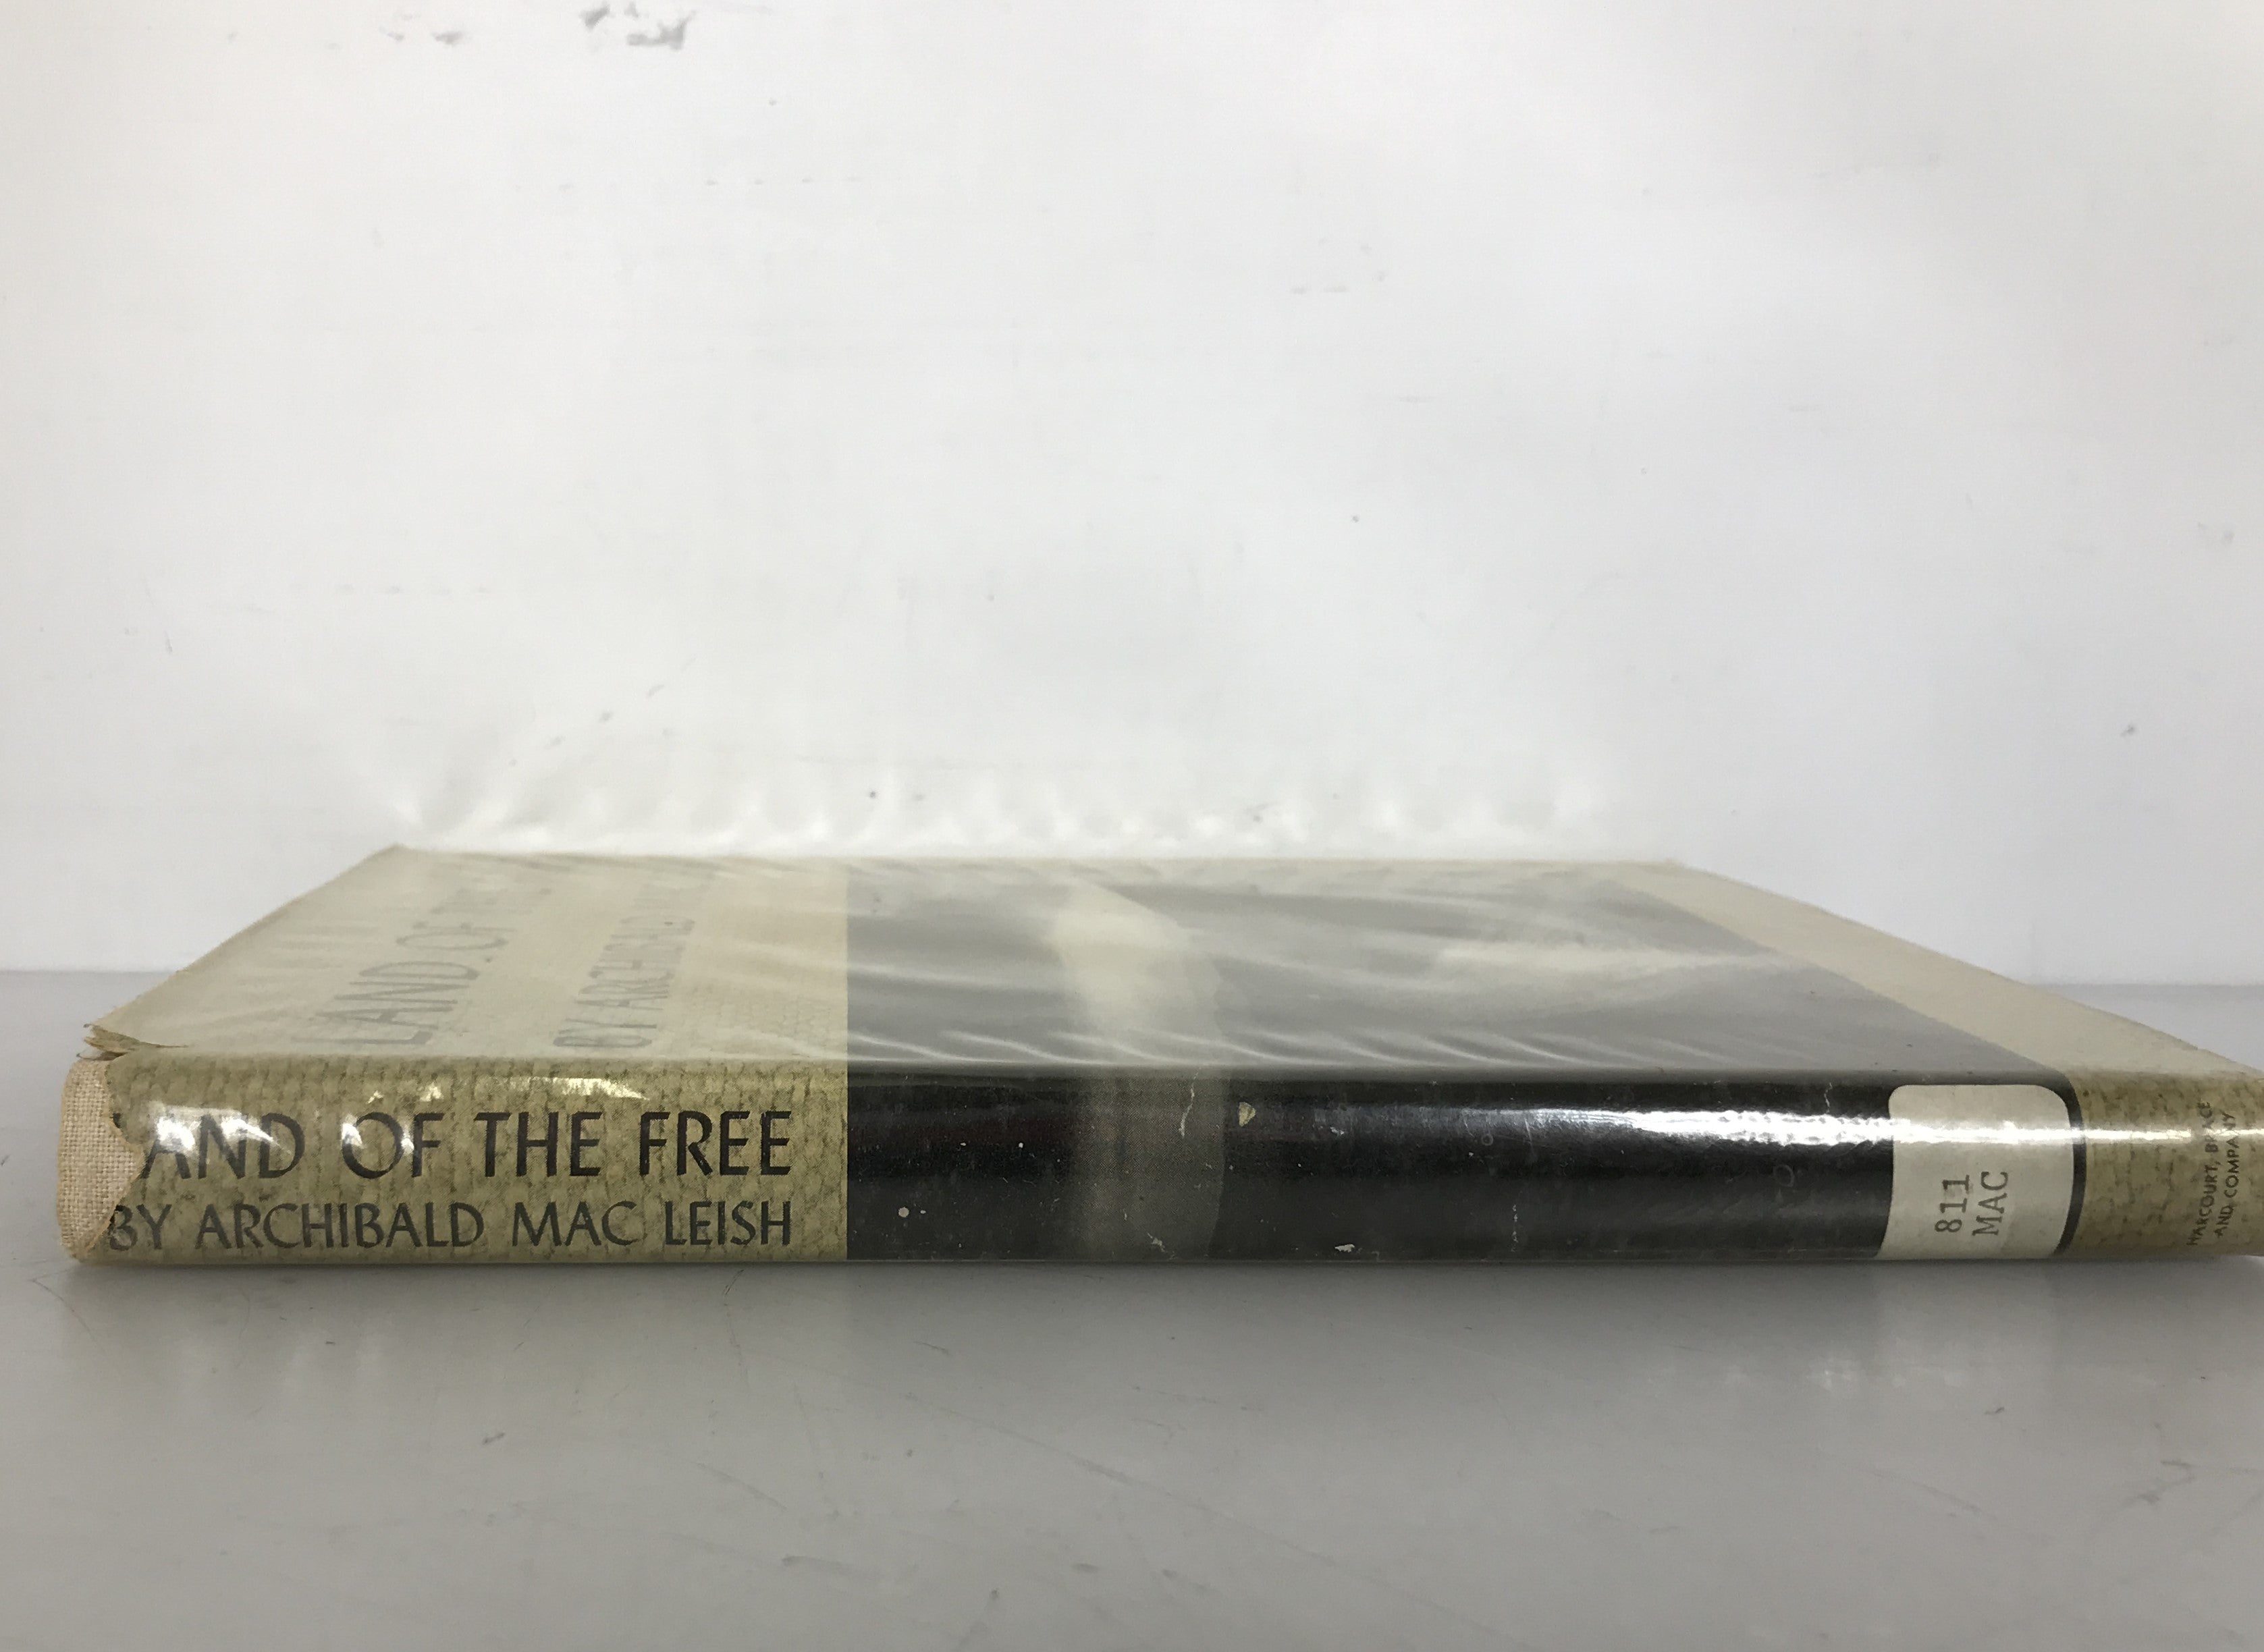 Land of the Free by Archibald MacLeish 1938 HC DJ